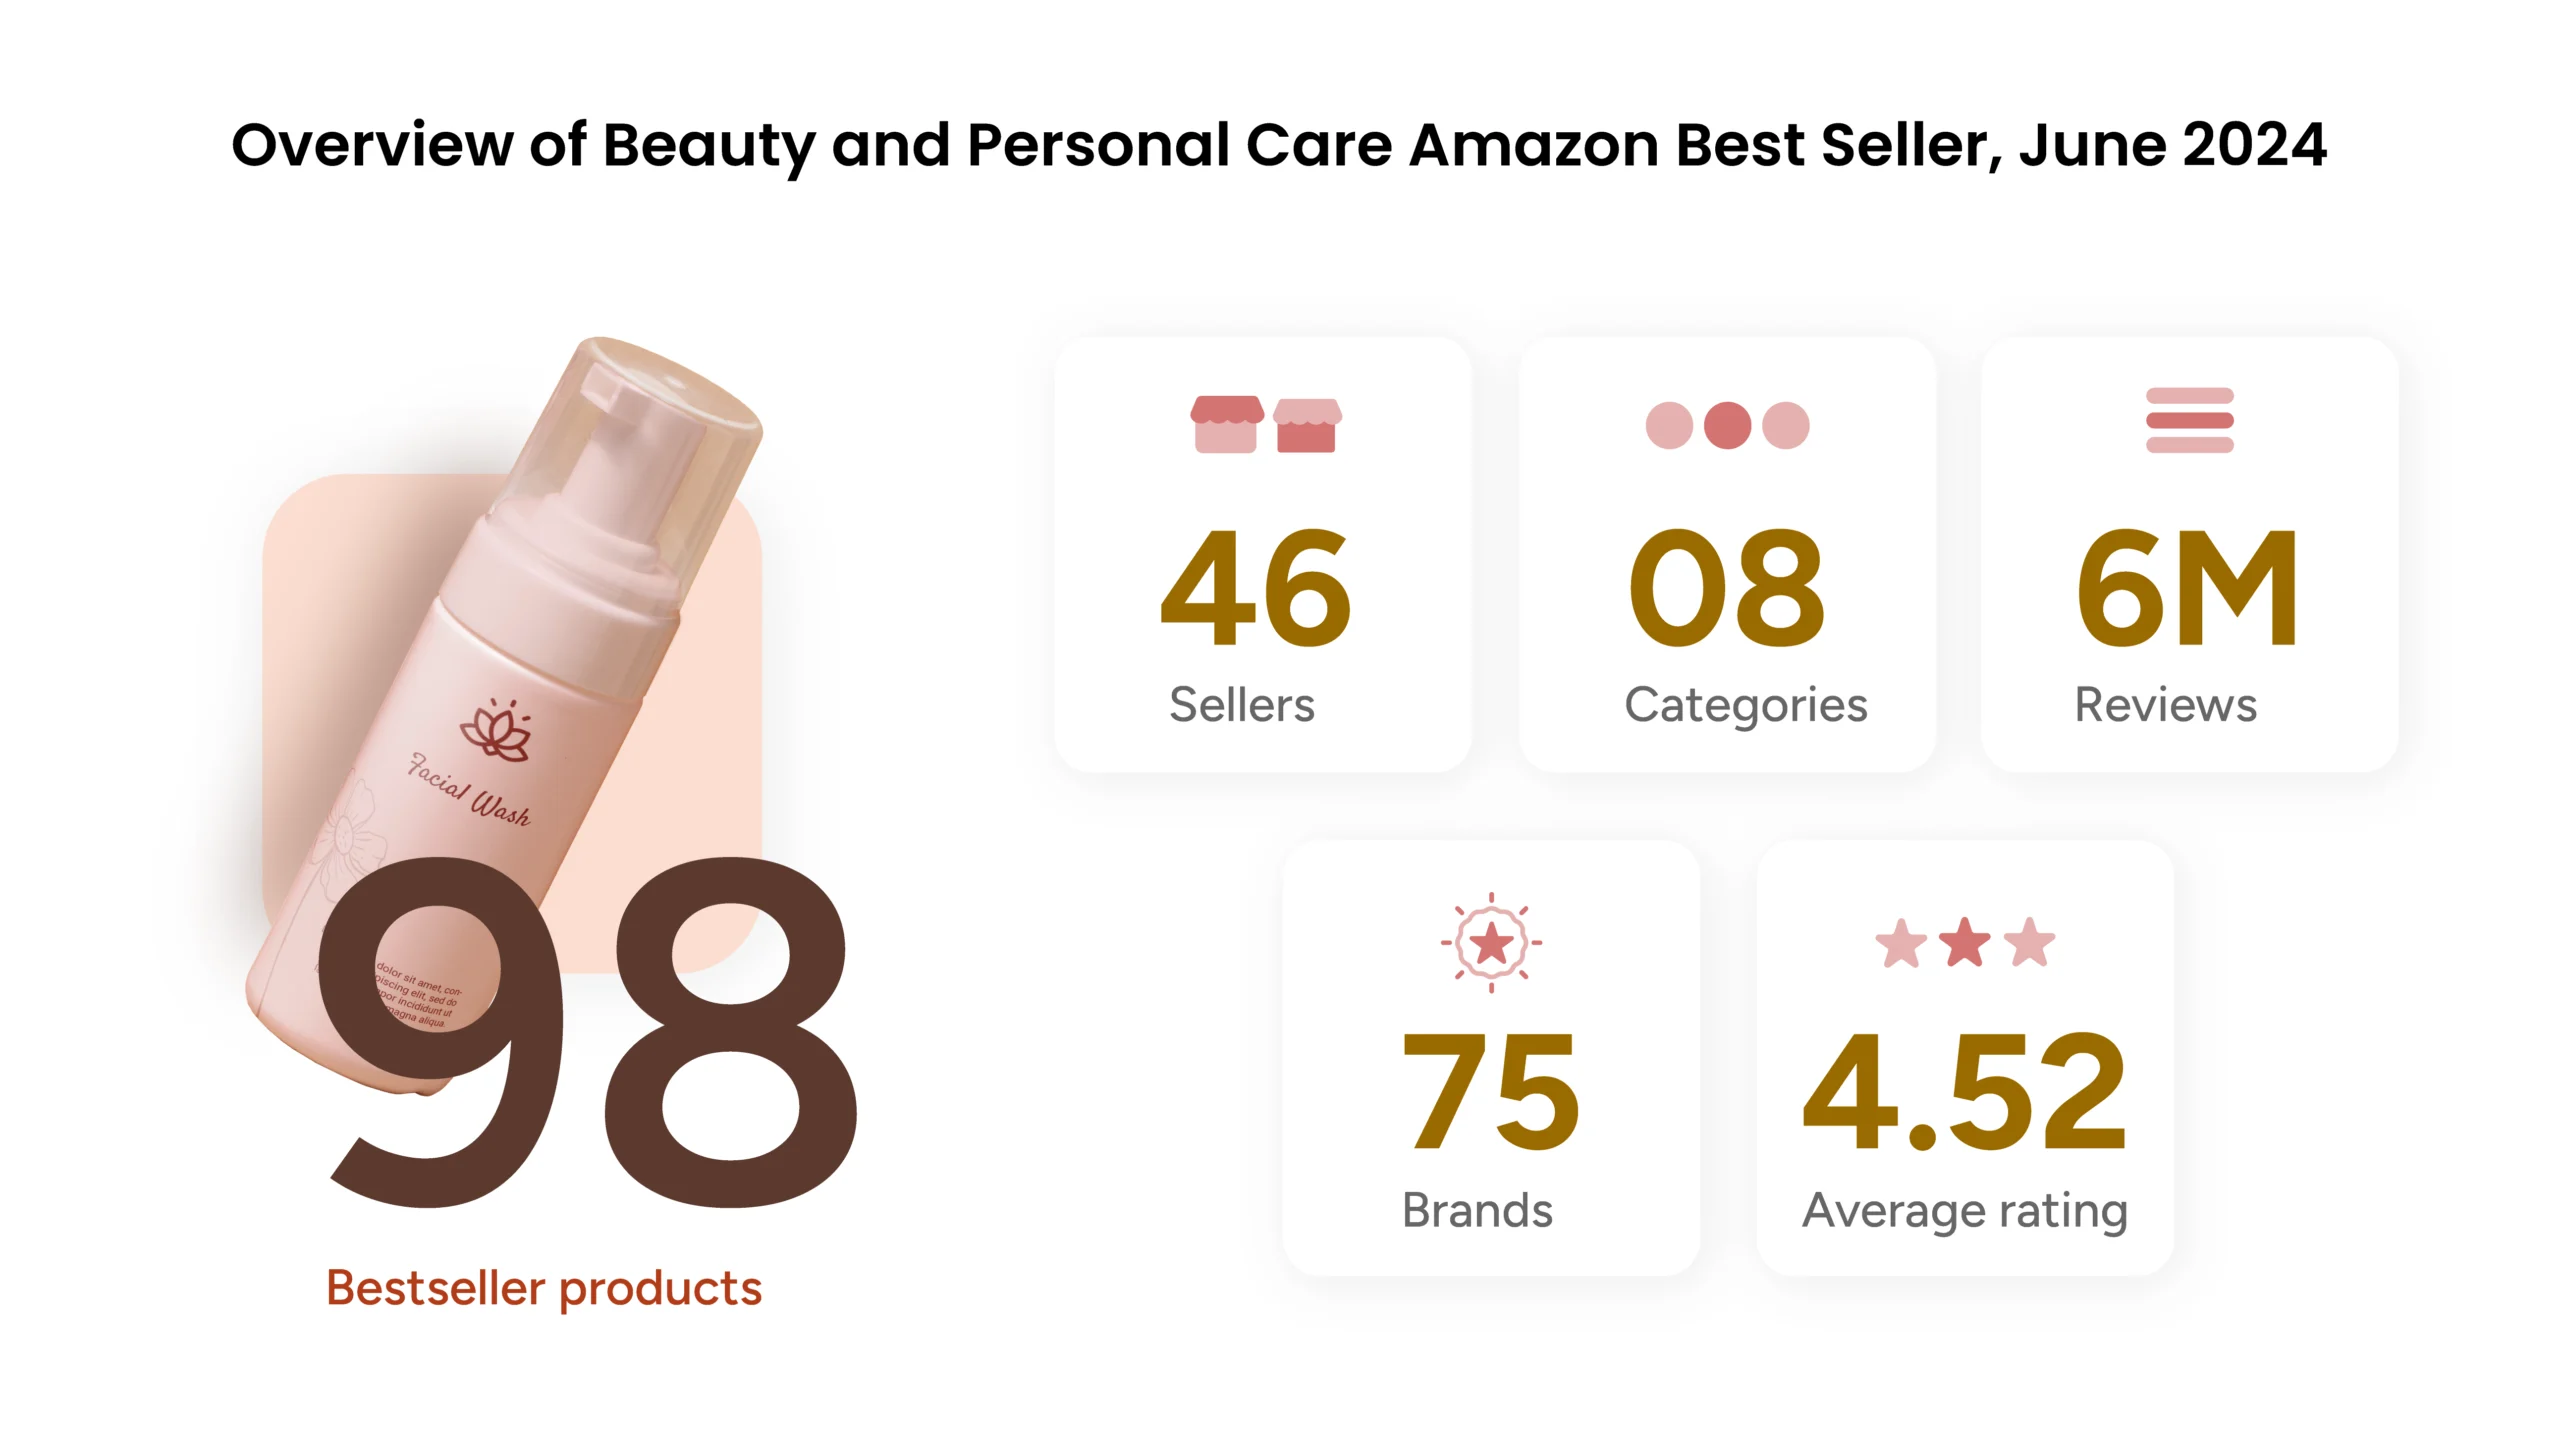 the Amazon Best Seller beauty and personal care category overview. 